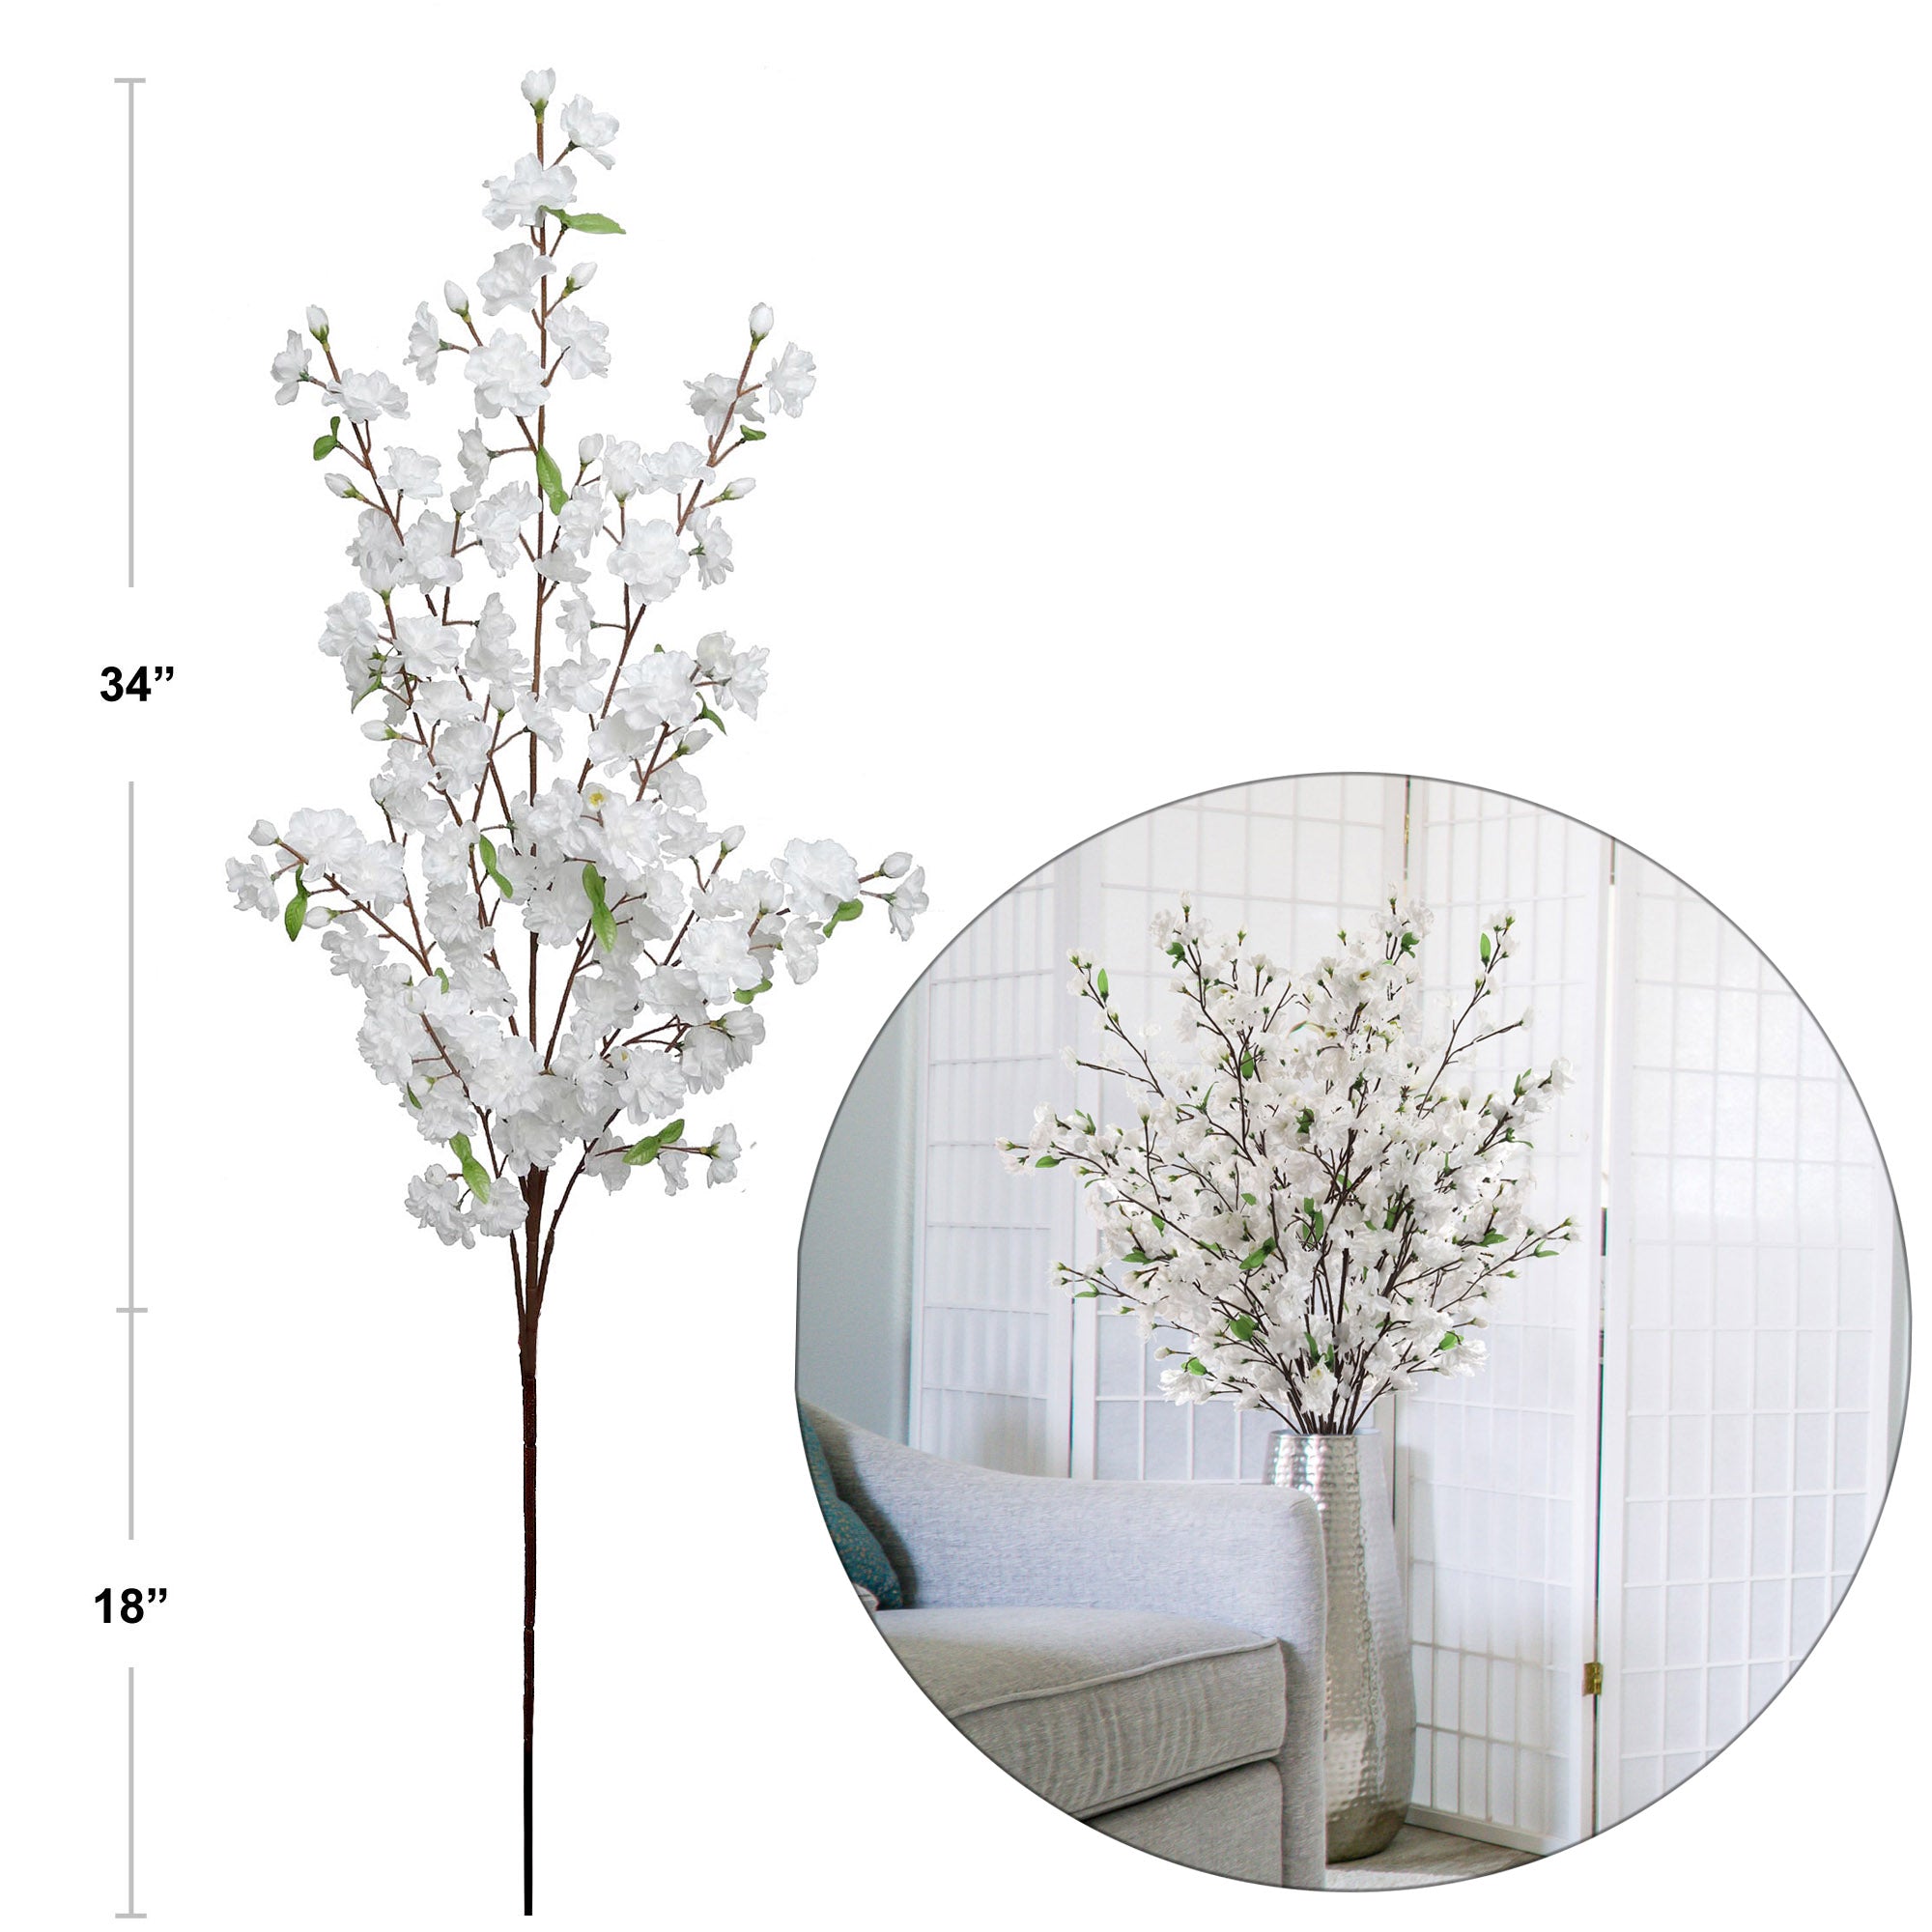 52" White Cherry Blossom Spray - Lifelike Artificial Branch for Home Decor, Wedding Centerpieces, and Floral Arrangements